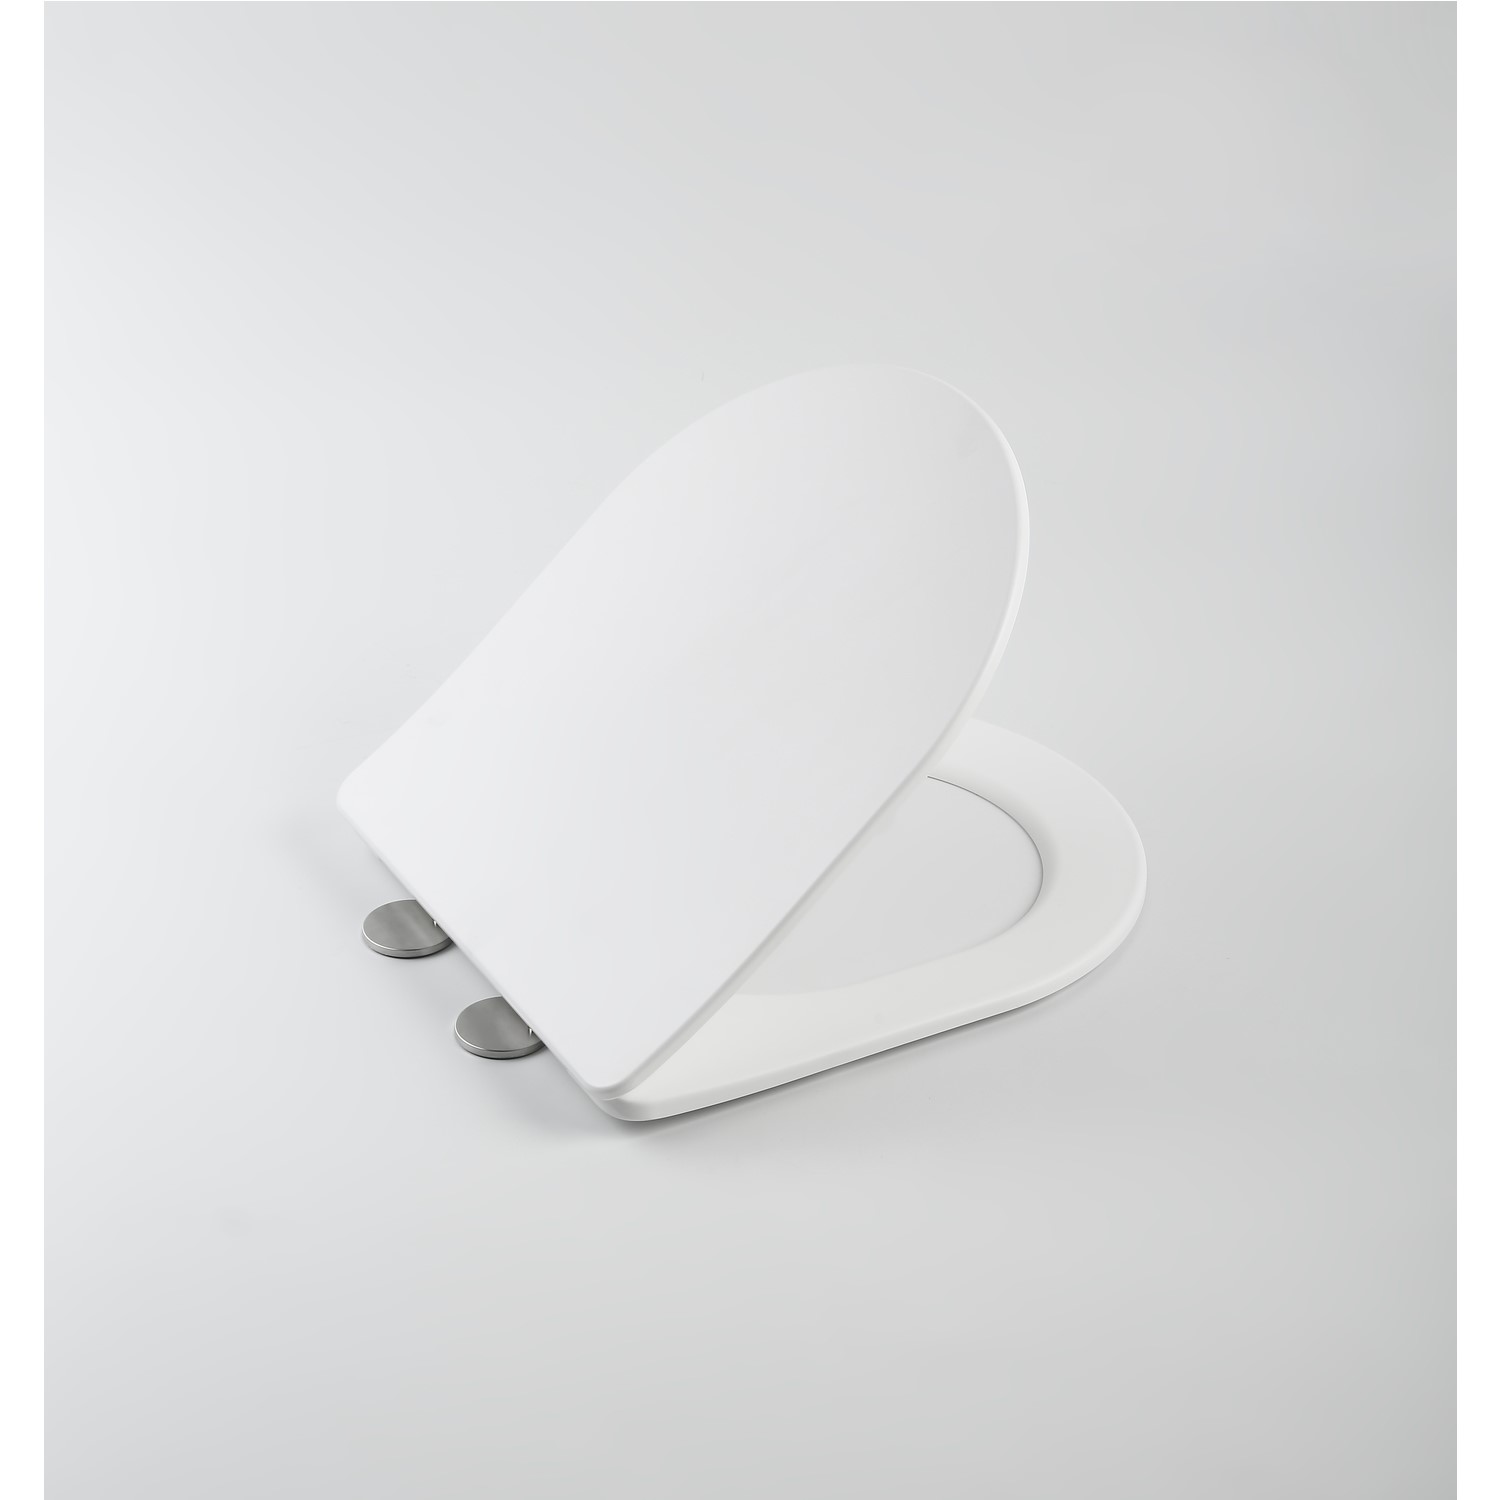 Wall Hung Rimless Toilet with Soft Close Seat - Verona